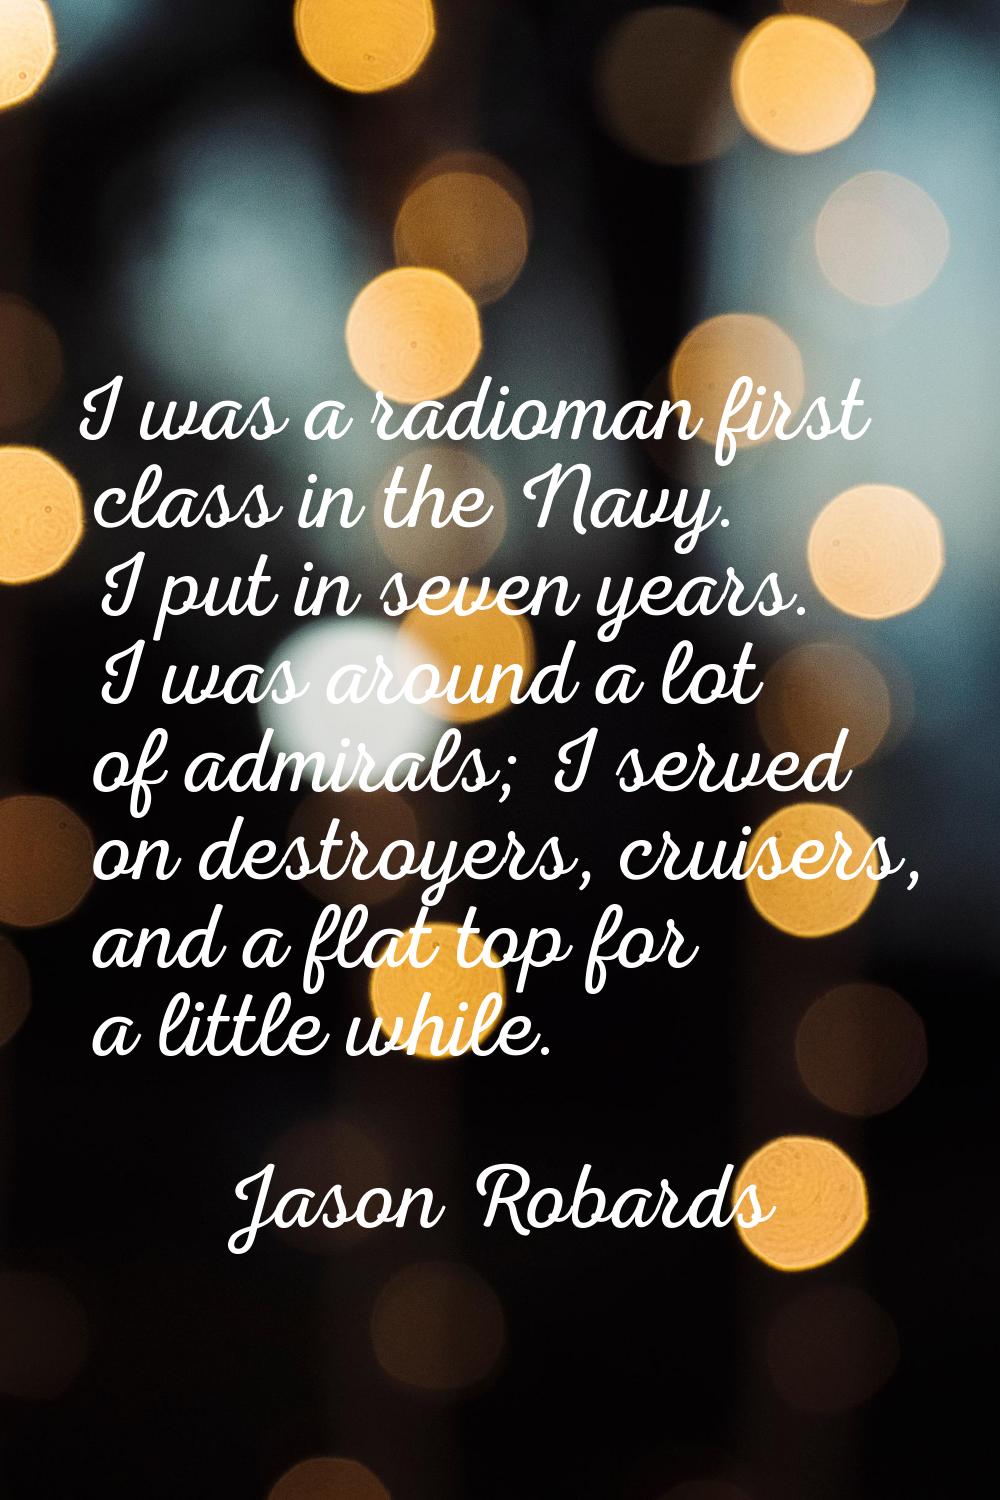 I was a radioman first class in the Navy. I put in seven years. I was around a lot of admirals; I s